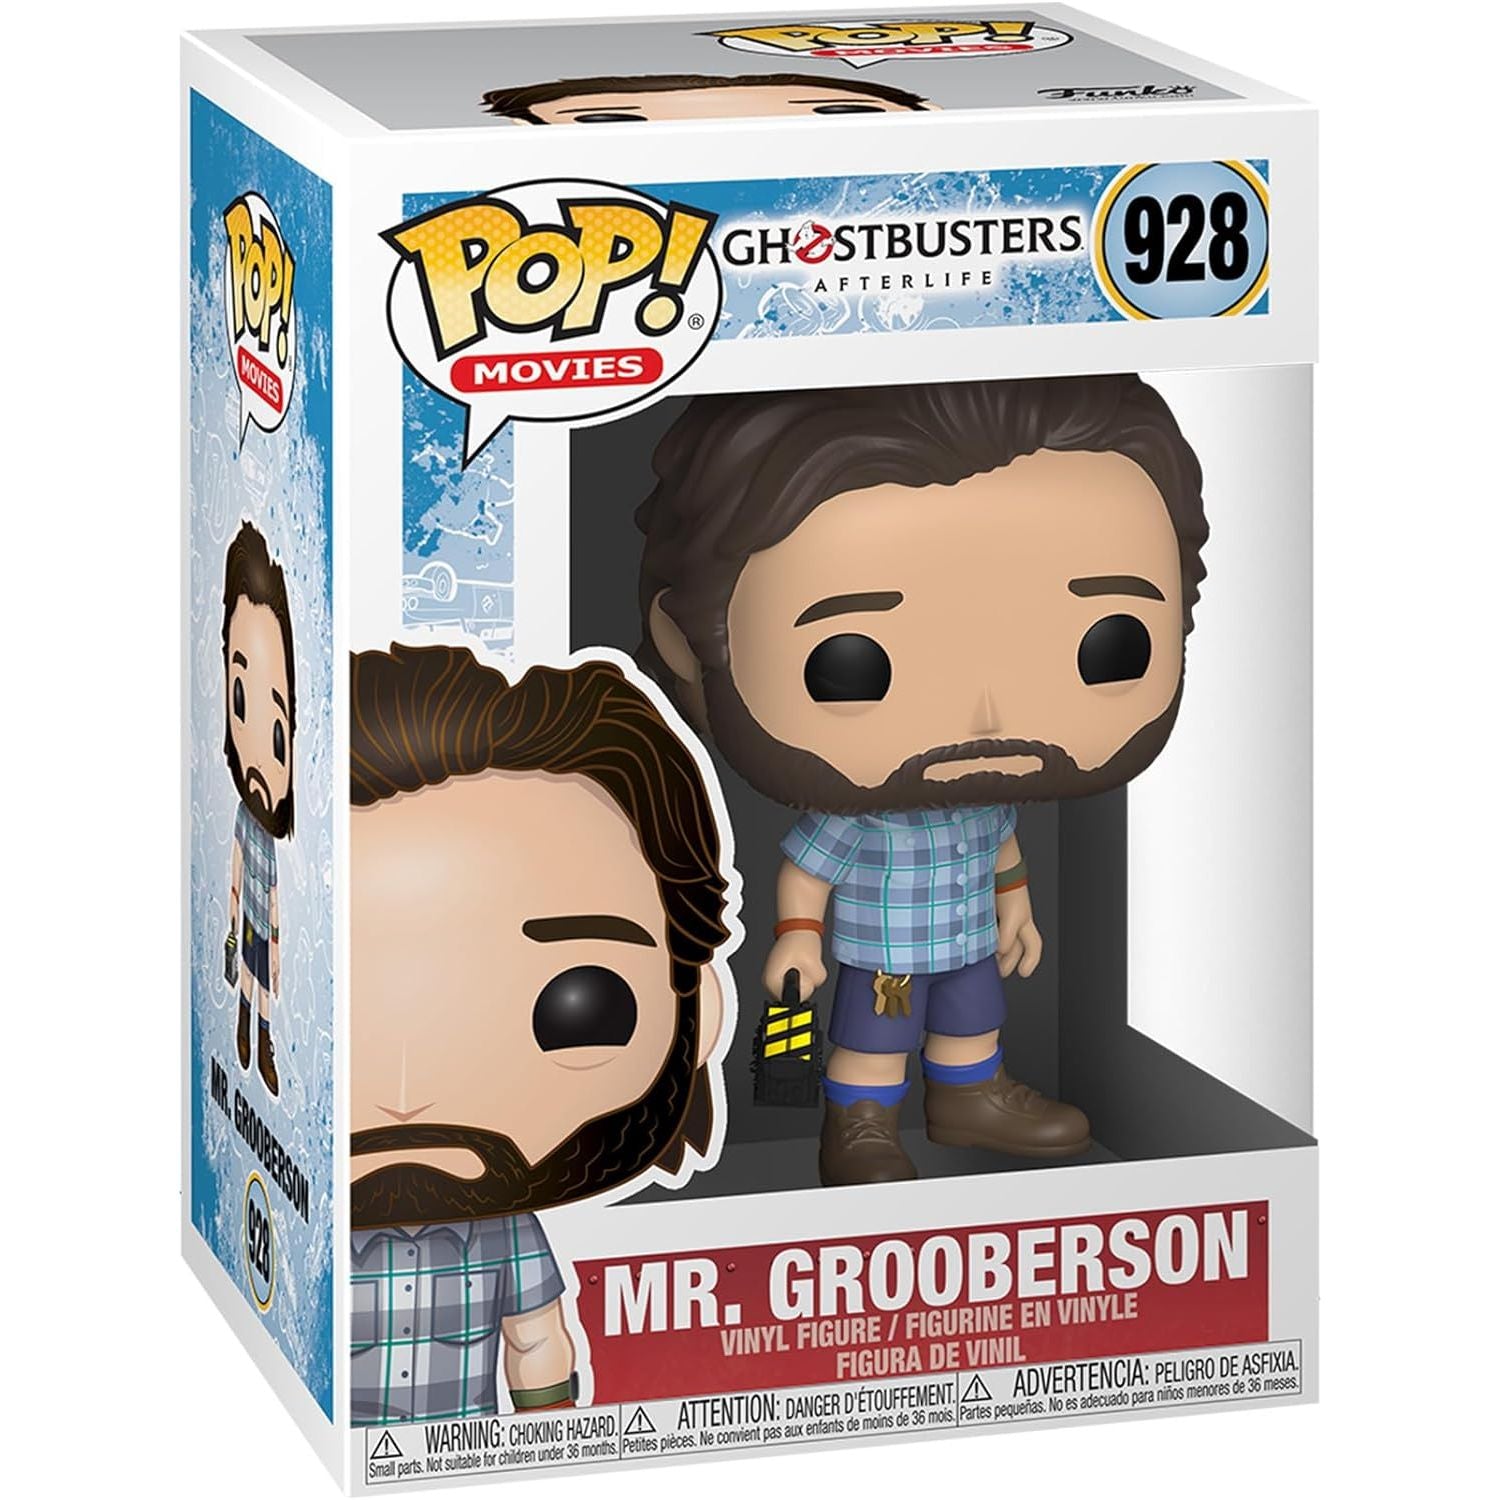 Funko POP Movies Ghostbusters Afterlife - Mr. Gooberson